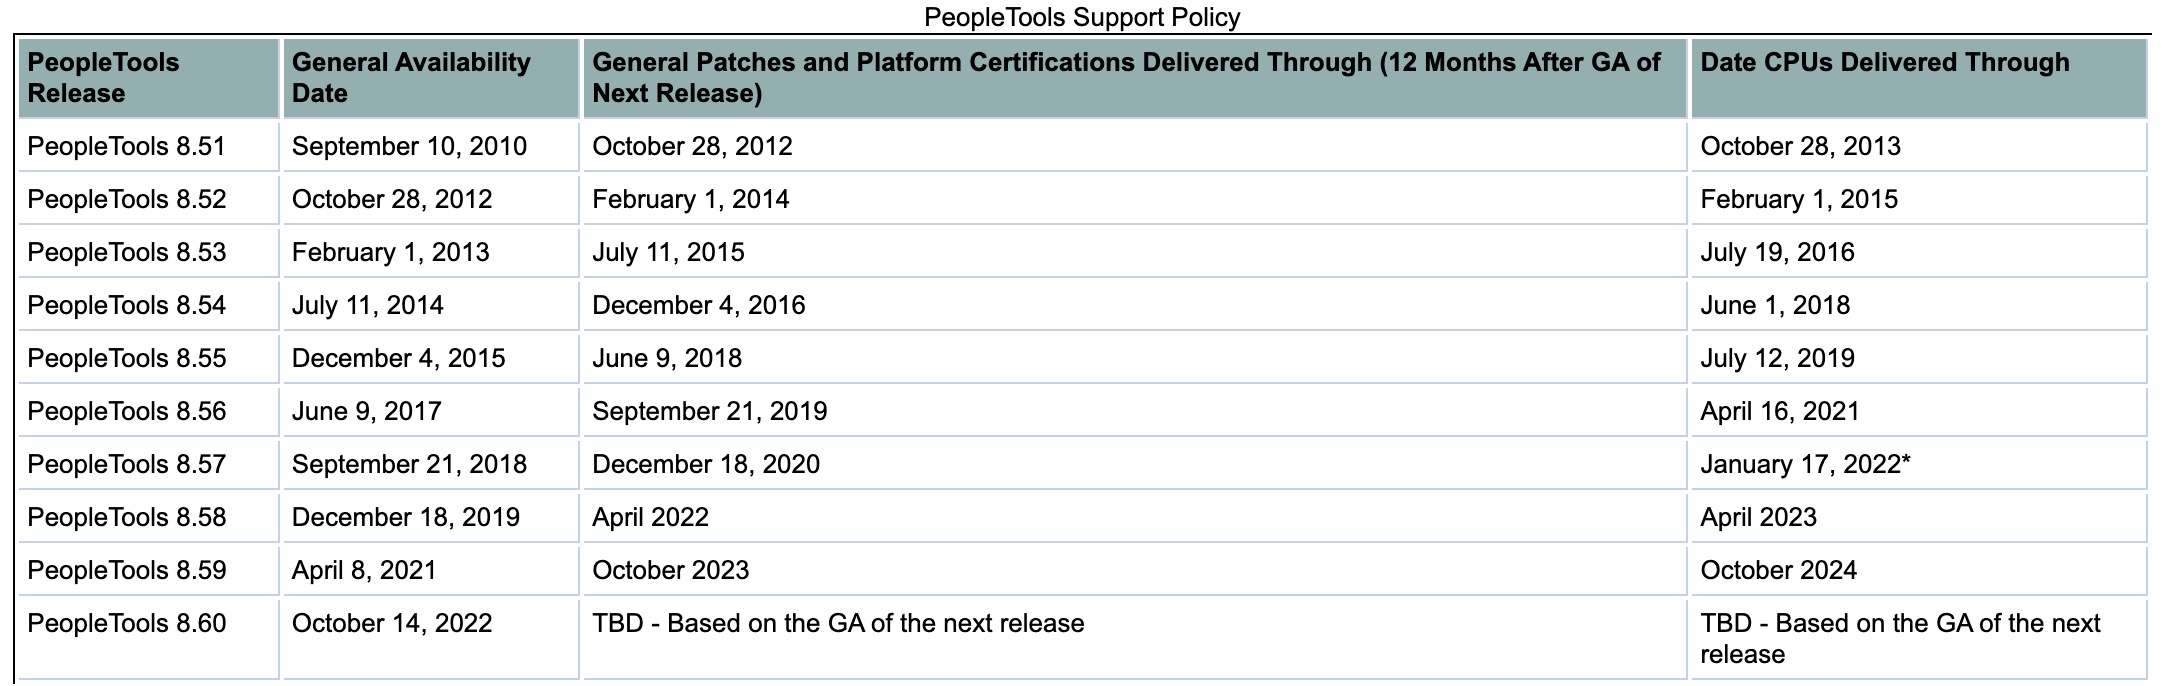 PeopleTools Support Policy